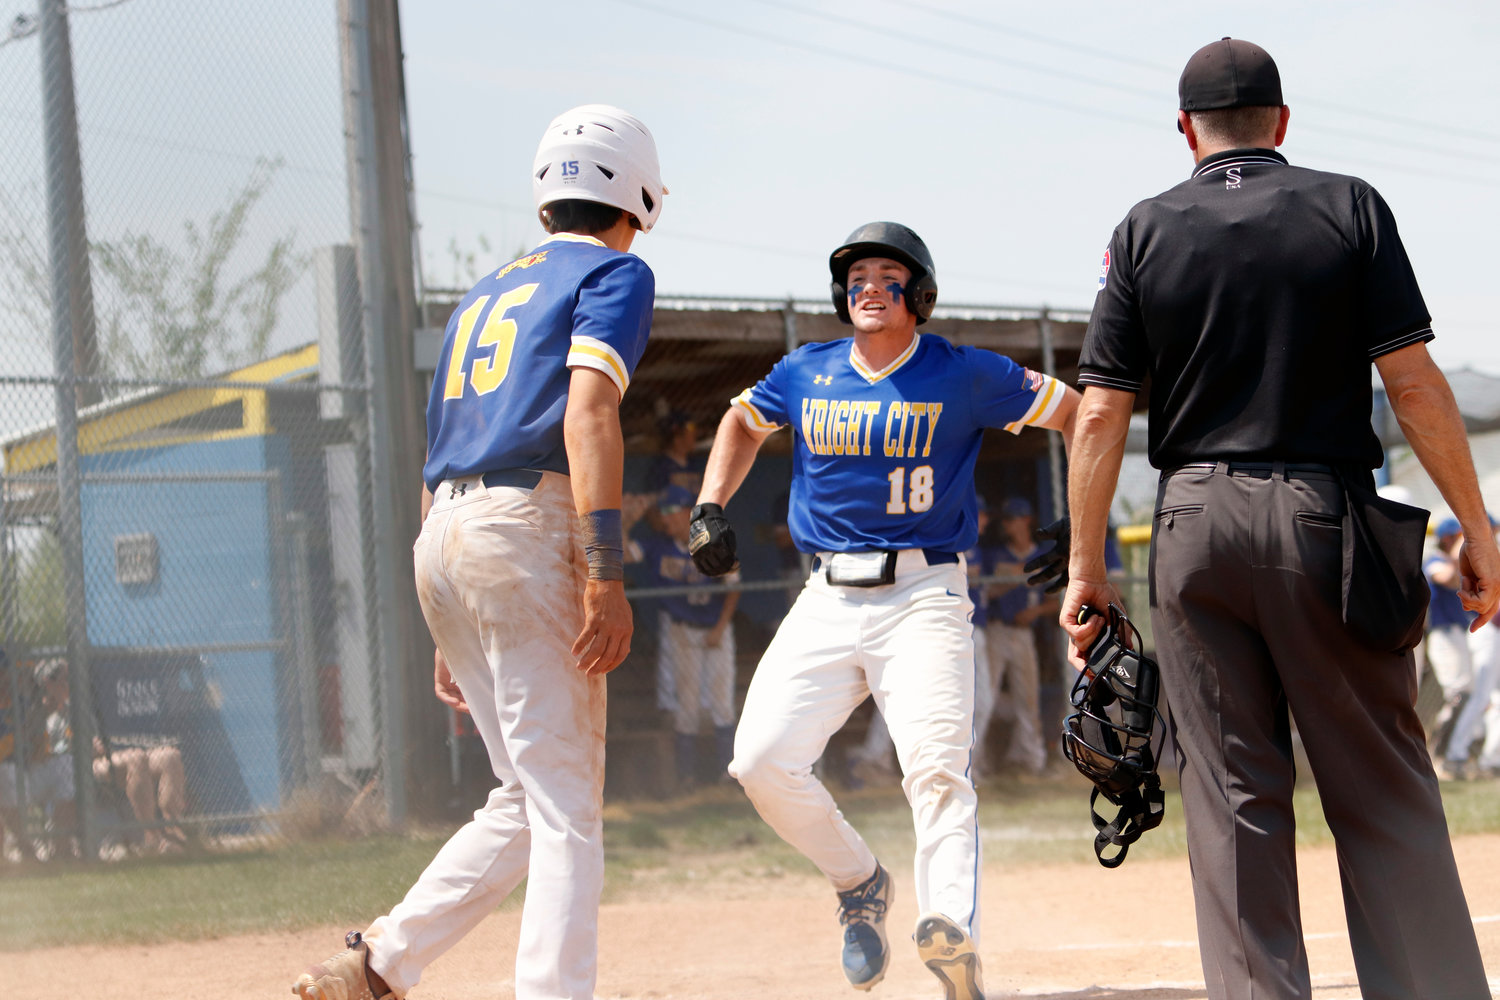 Ian Wolff (right) celebrates as he crosses the plate during the third inning of Wright City's win over Bowling Green. Wolff and Logan McCartney (left) scored on the play.